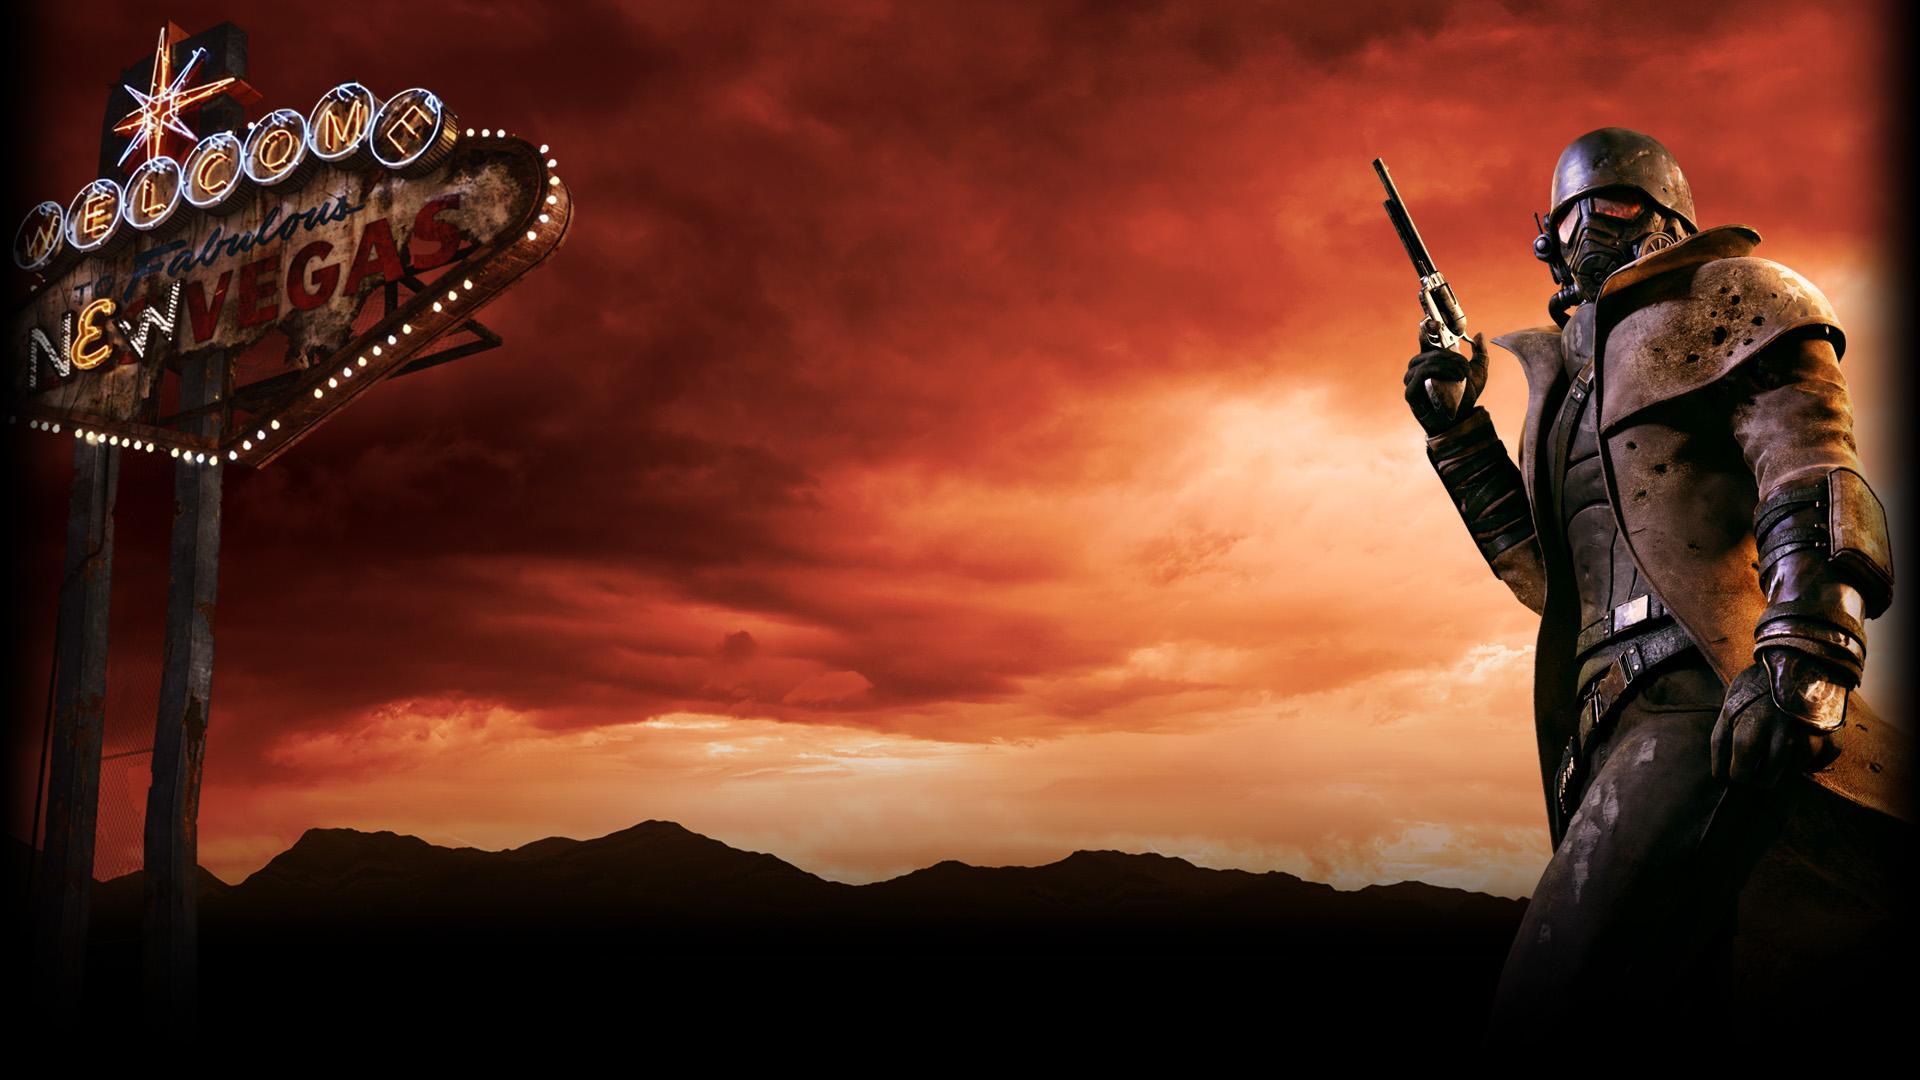 fallout new vegas wallpaper hd,action adventure game,pc game,cg artwork,games,adventure game